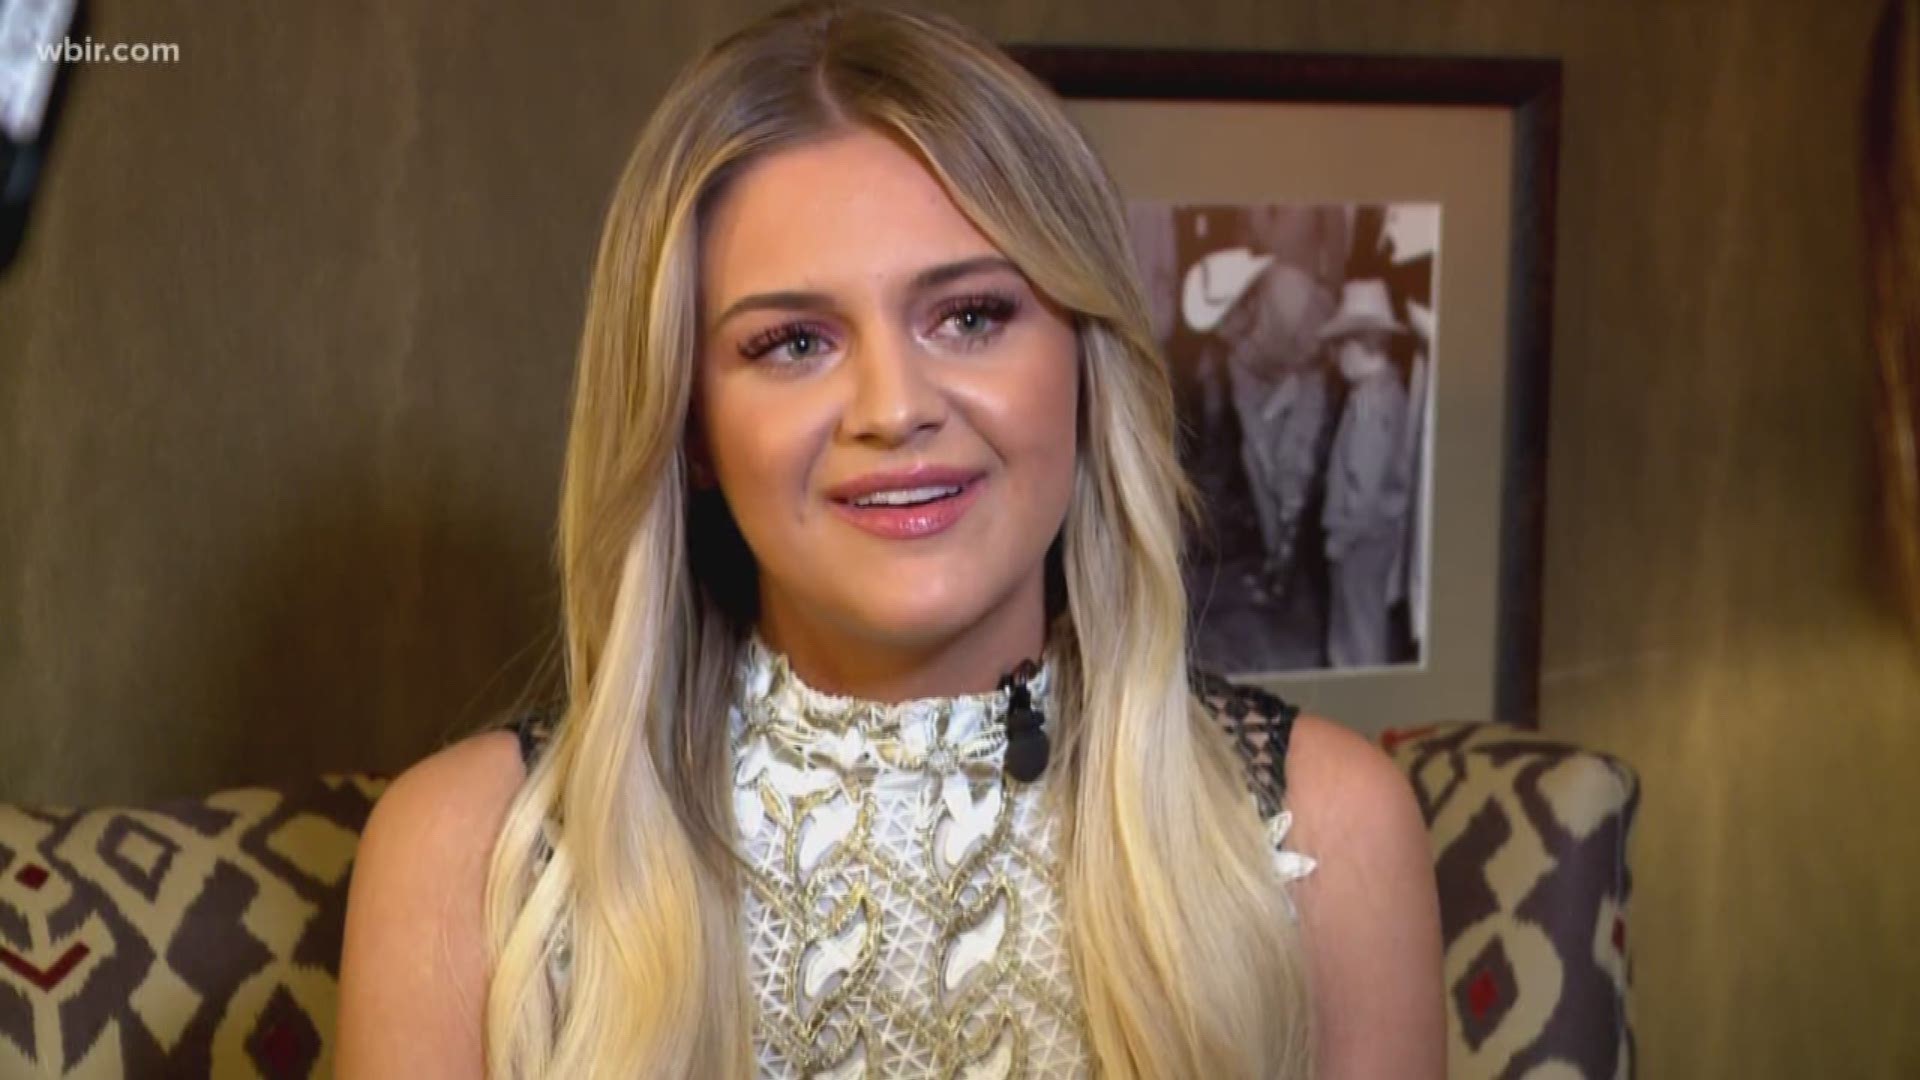 2019 is off to a great start for Kelsea Ballerini after an Opry induction, opening for Kelly Clarkson and headlining a new arena tour... and it’s only May!  The Knoxville native reflected on the milestones backstage at the Grand Ole Opry.